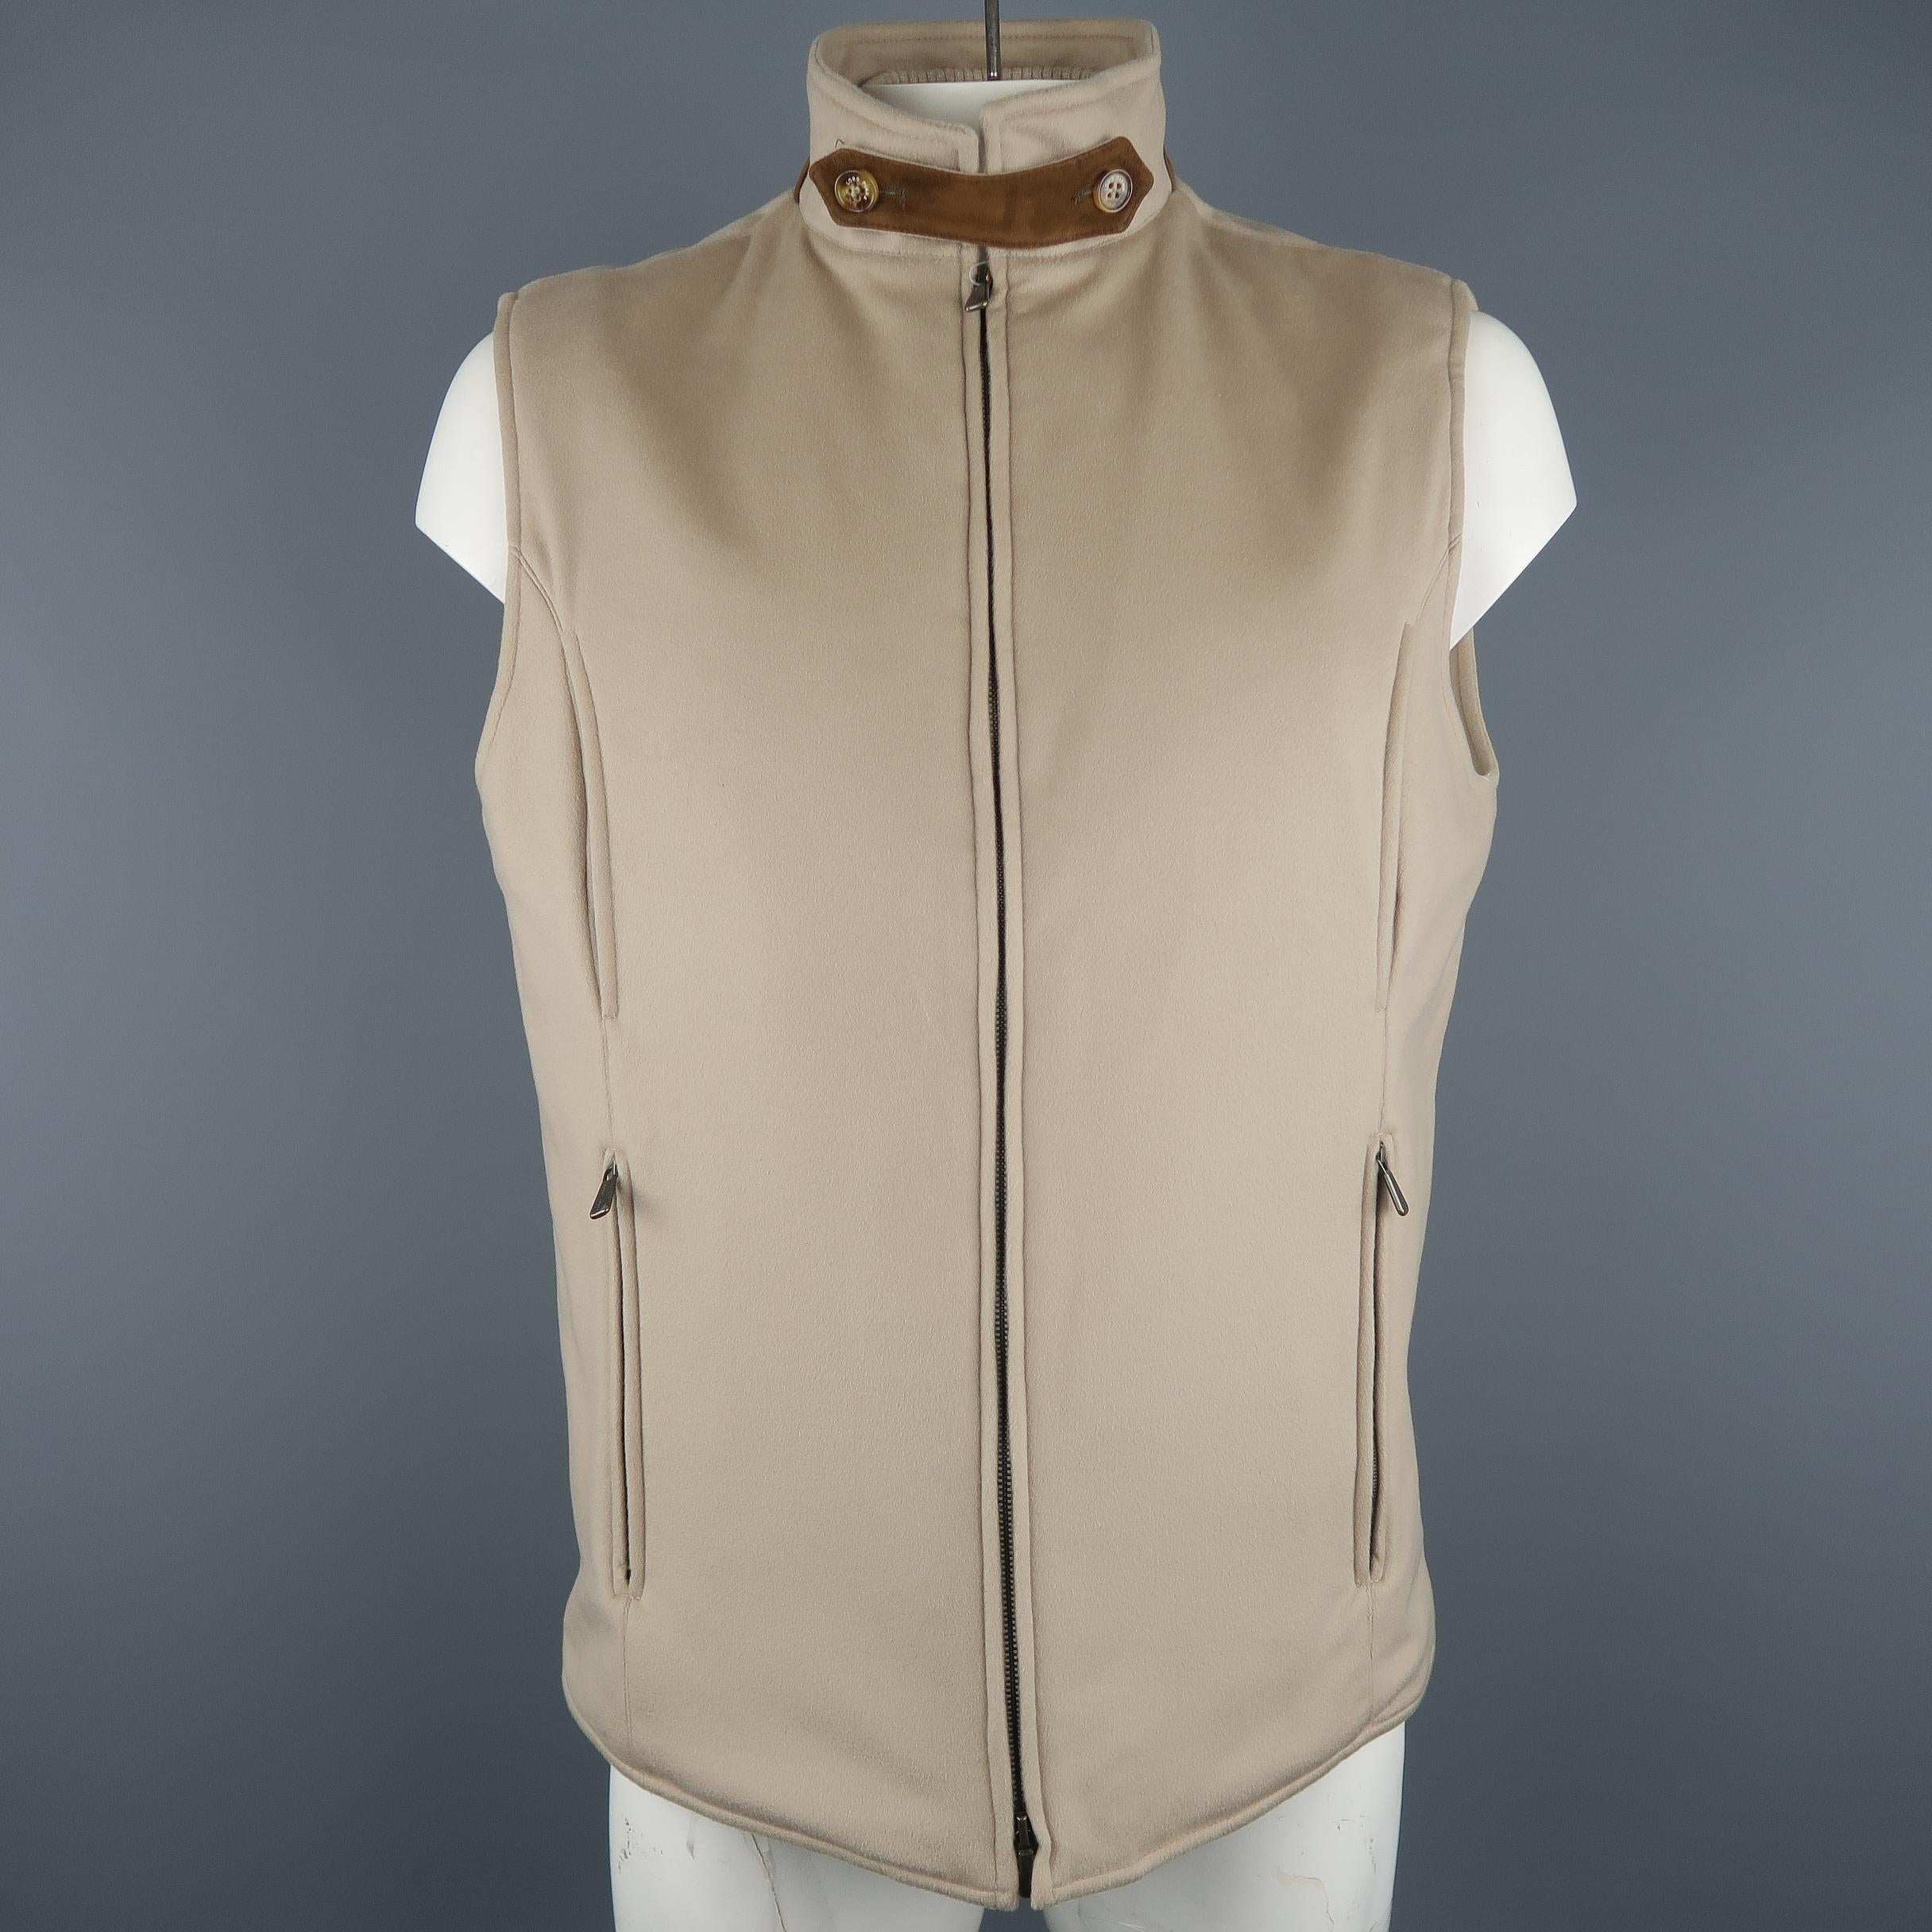 LORO PIANA Storm System vest comes in oatmeal beige cashmere with a high brown suede trimmed collar, double zip front, zip pockets, and ribbed cashmere knit inner collar. Made In Italy. Retail price $1,880.00
 
New with Tags.
Marked: XL
